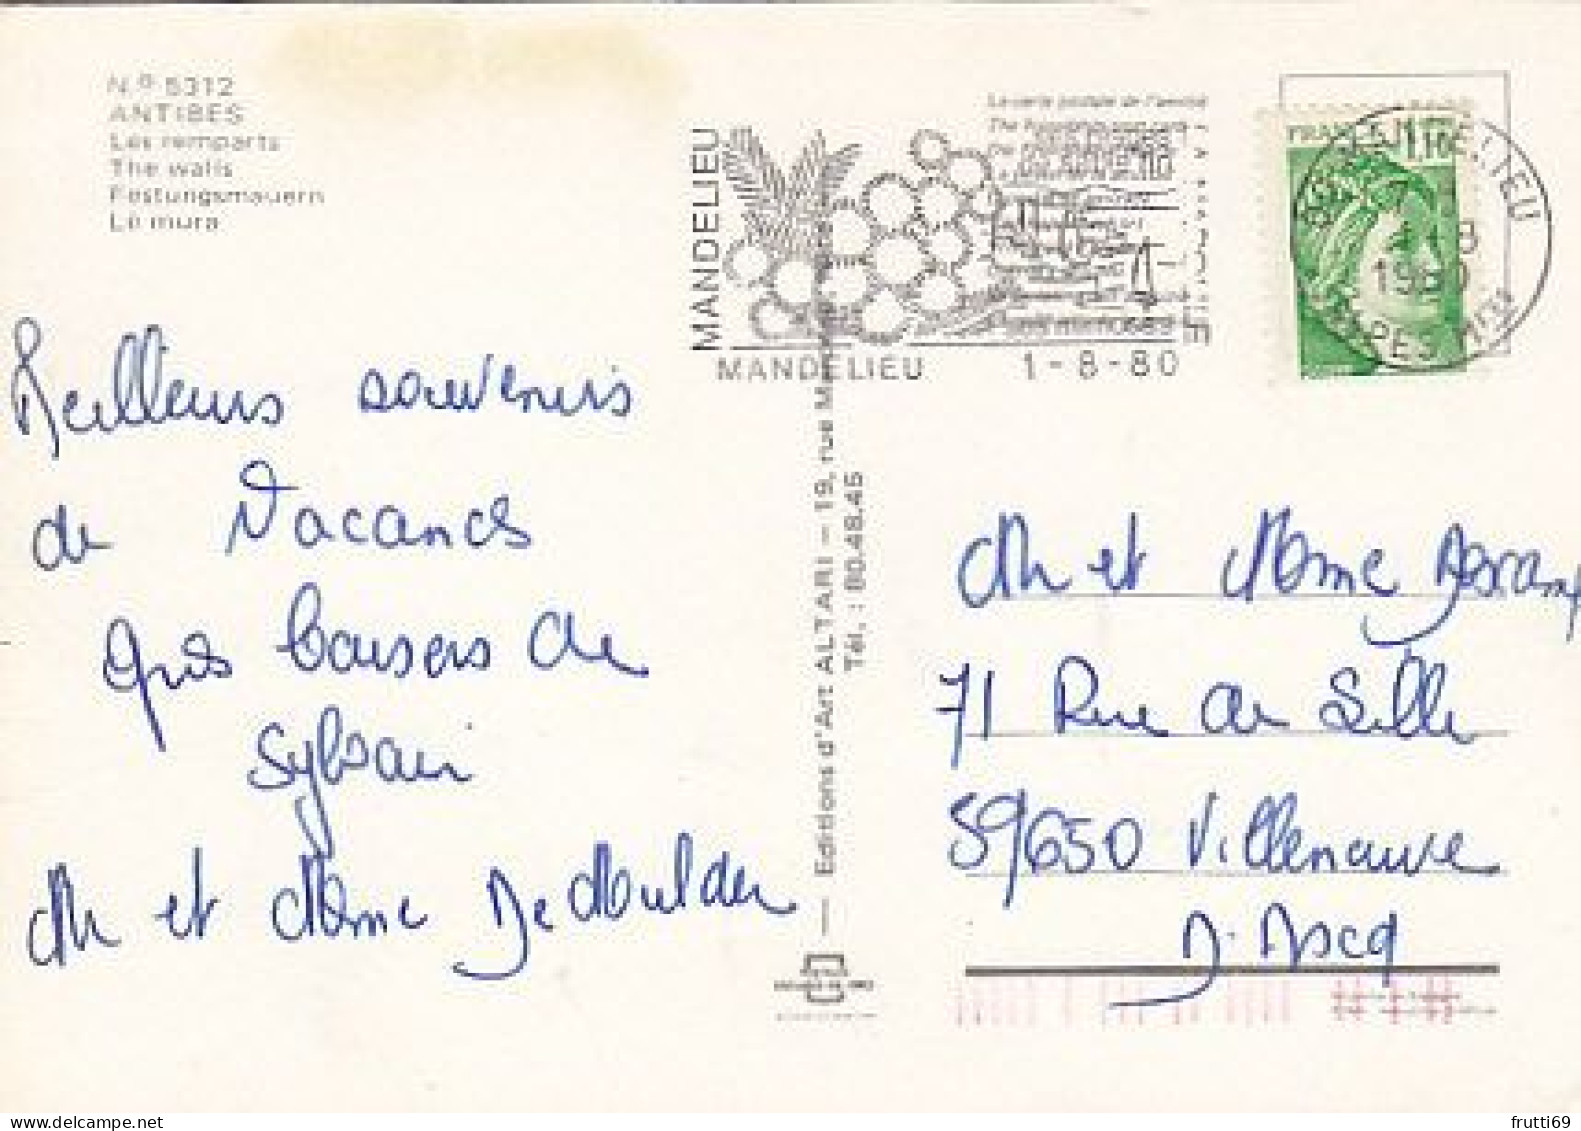 AK 210857 FRANCE - Antibes - Les Remparts - Antibes - Les Remparts